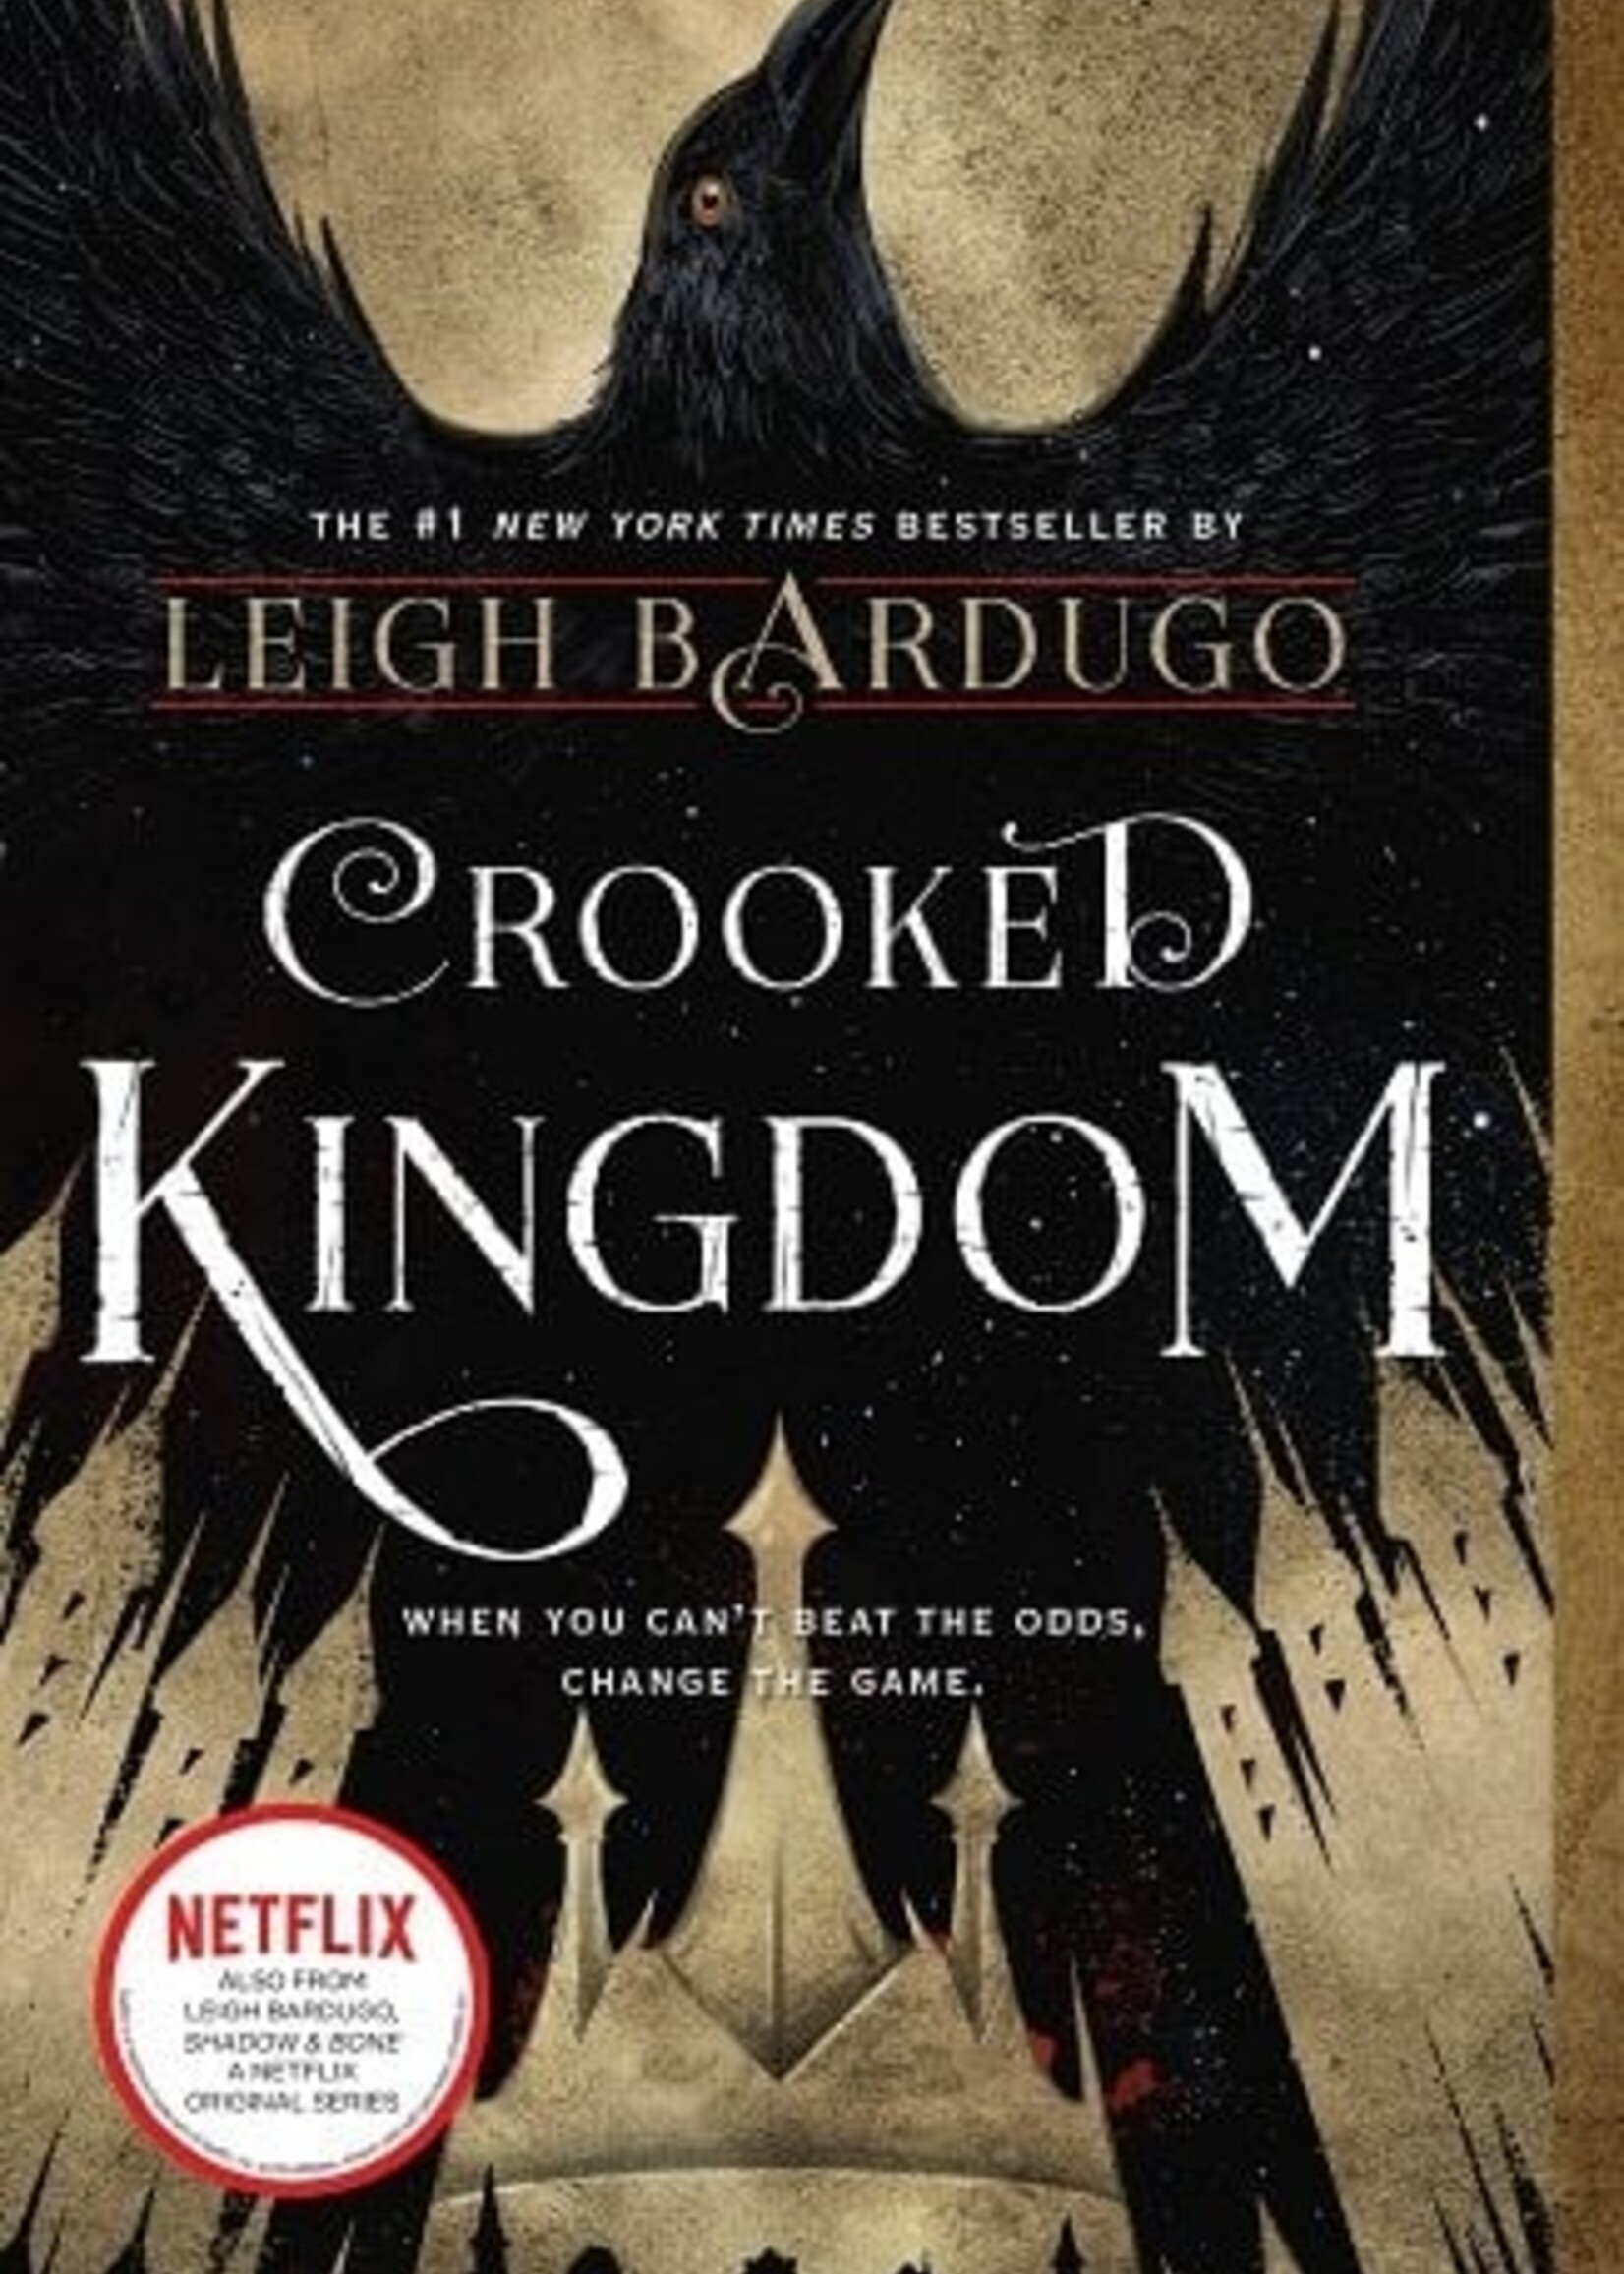 Square Fish Crooked Kingdom (Part of the Six of Crows (#2) Series and Grishaverse (#5) Series)